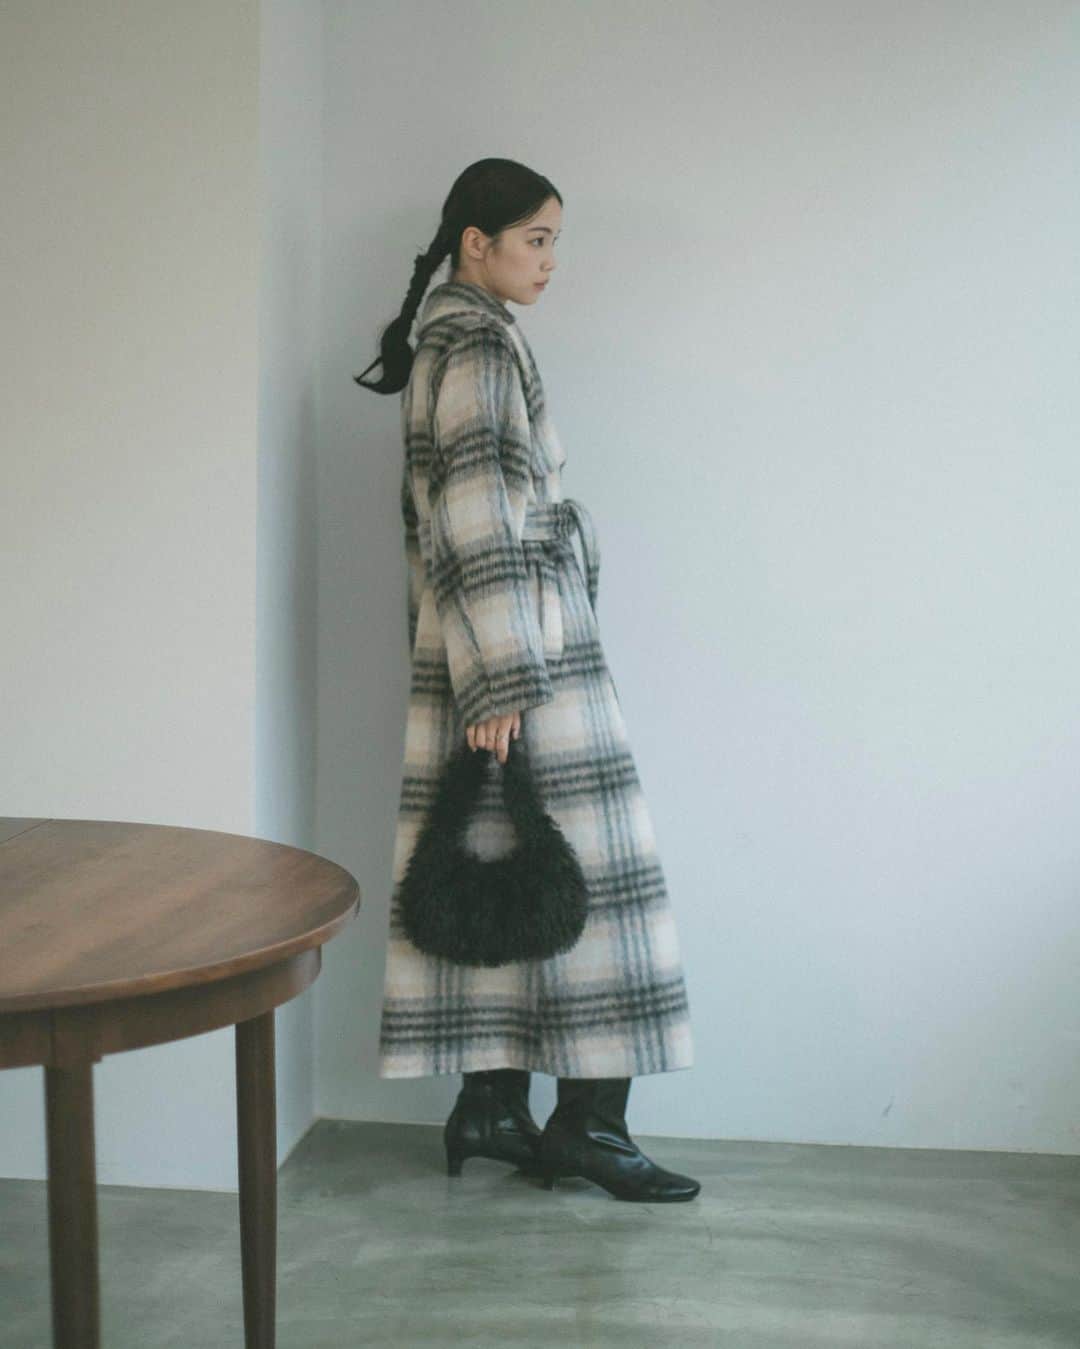 Vannie Officialのインスタグラム：「23 WINTER COLLECTION.  ︎︎ boacollar gown coat S / M plaid / beige / black ¥13,200(tax in)  ︎︎  mix over knit cardigan beige / green / blue / pink /red ¥5,390(tax in)  ︎︎ tack flare mini skirt black / gray ¥4,290(tax in)  ︎︎  boa feather hand bag ivory / black ¥3,520(tax in)  ︎︎ #vannie_u #ヴァニーユー」